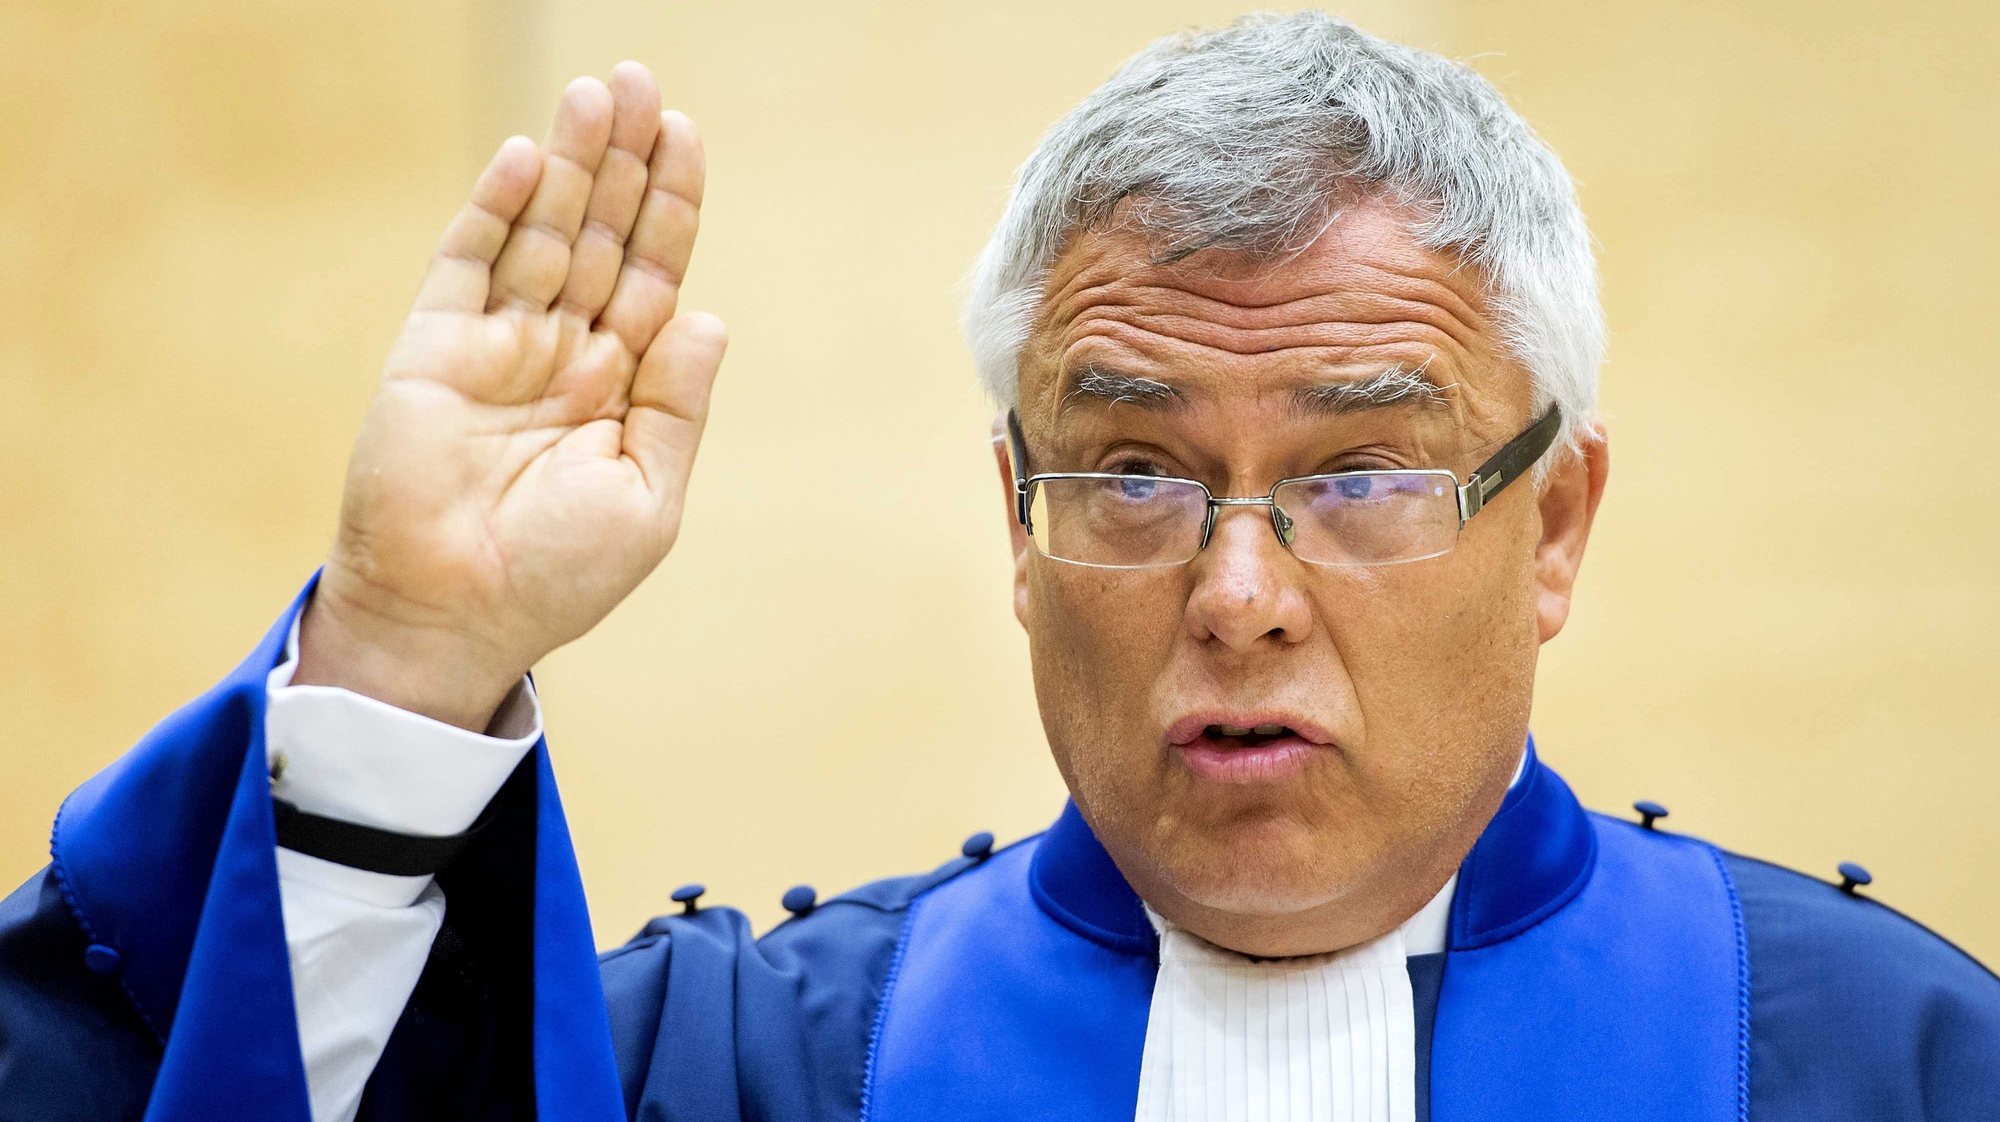 epa04656355 Judge Piotr Hofmanski of Poland takes the oath during a swearing-in ceremony for six new judges at the International Criminal Court (ICC) in The Hague, the Netherlands, 10 March 2015.  EPA/KOEN VAN WEEL / POOL